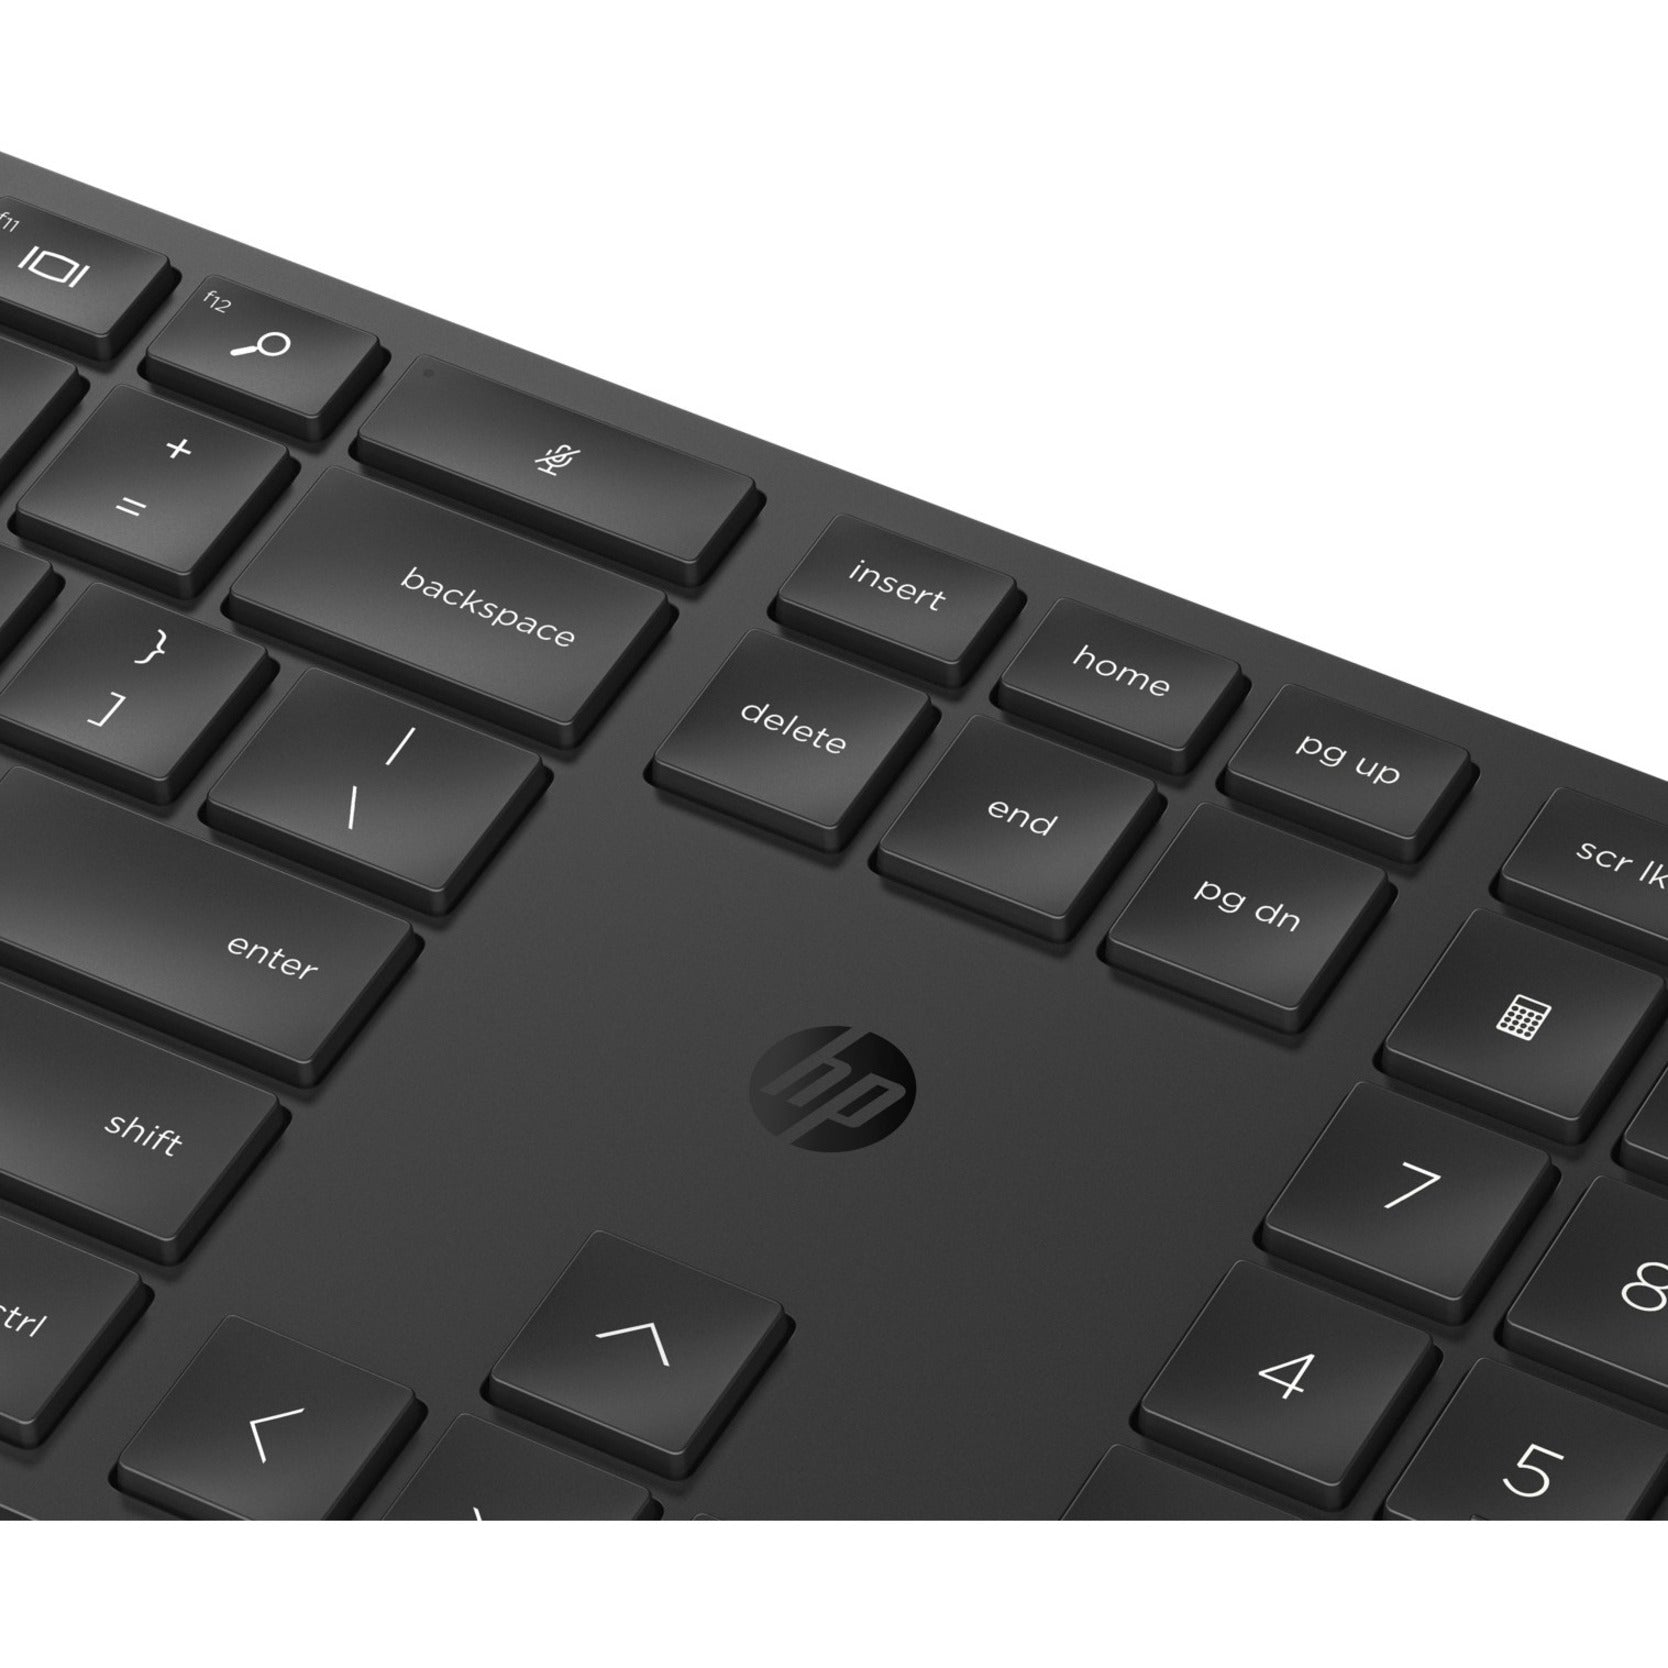 HP 655 Wireless Keyboard and Mouse Combo for business, Battery Indicator, Programmable Keys